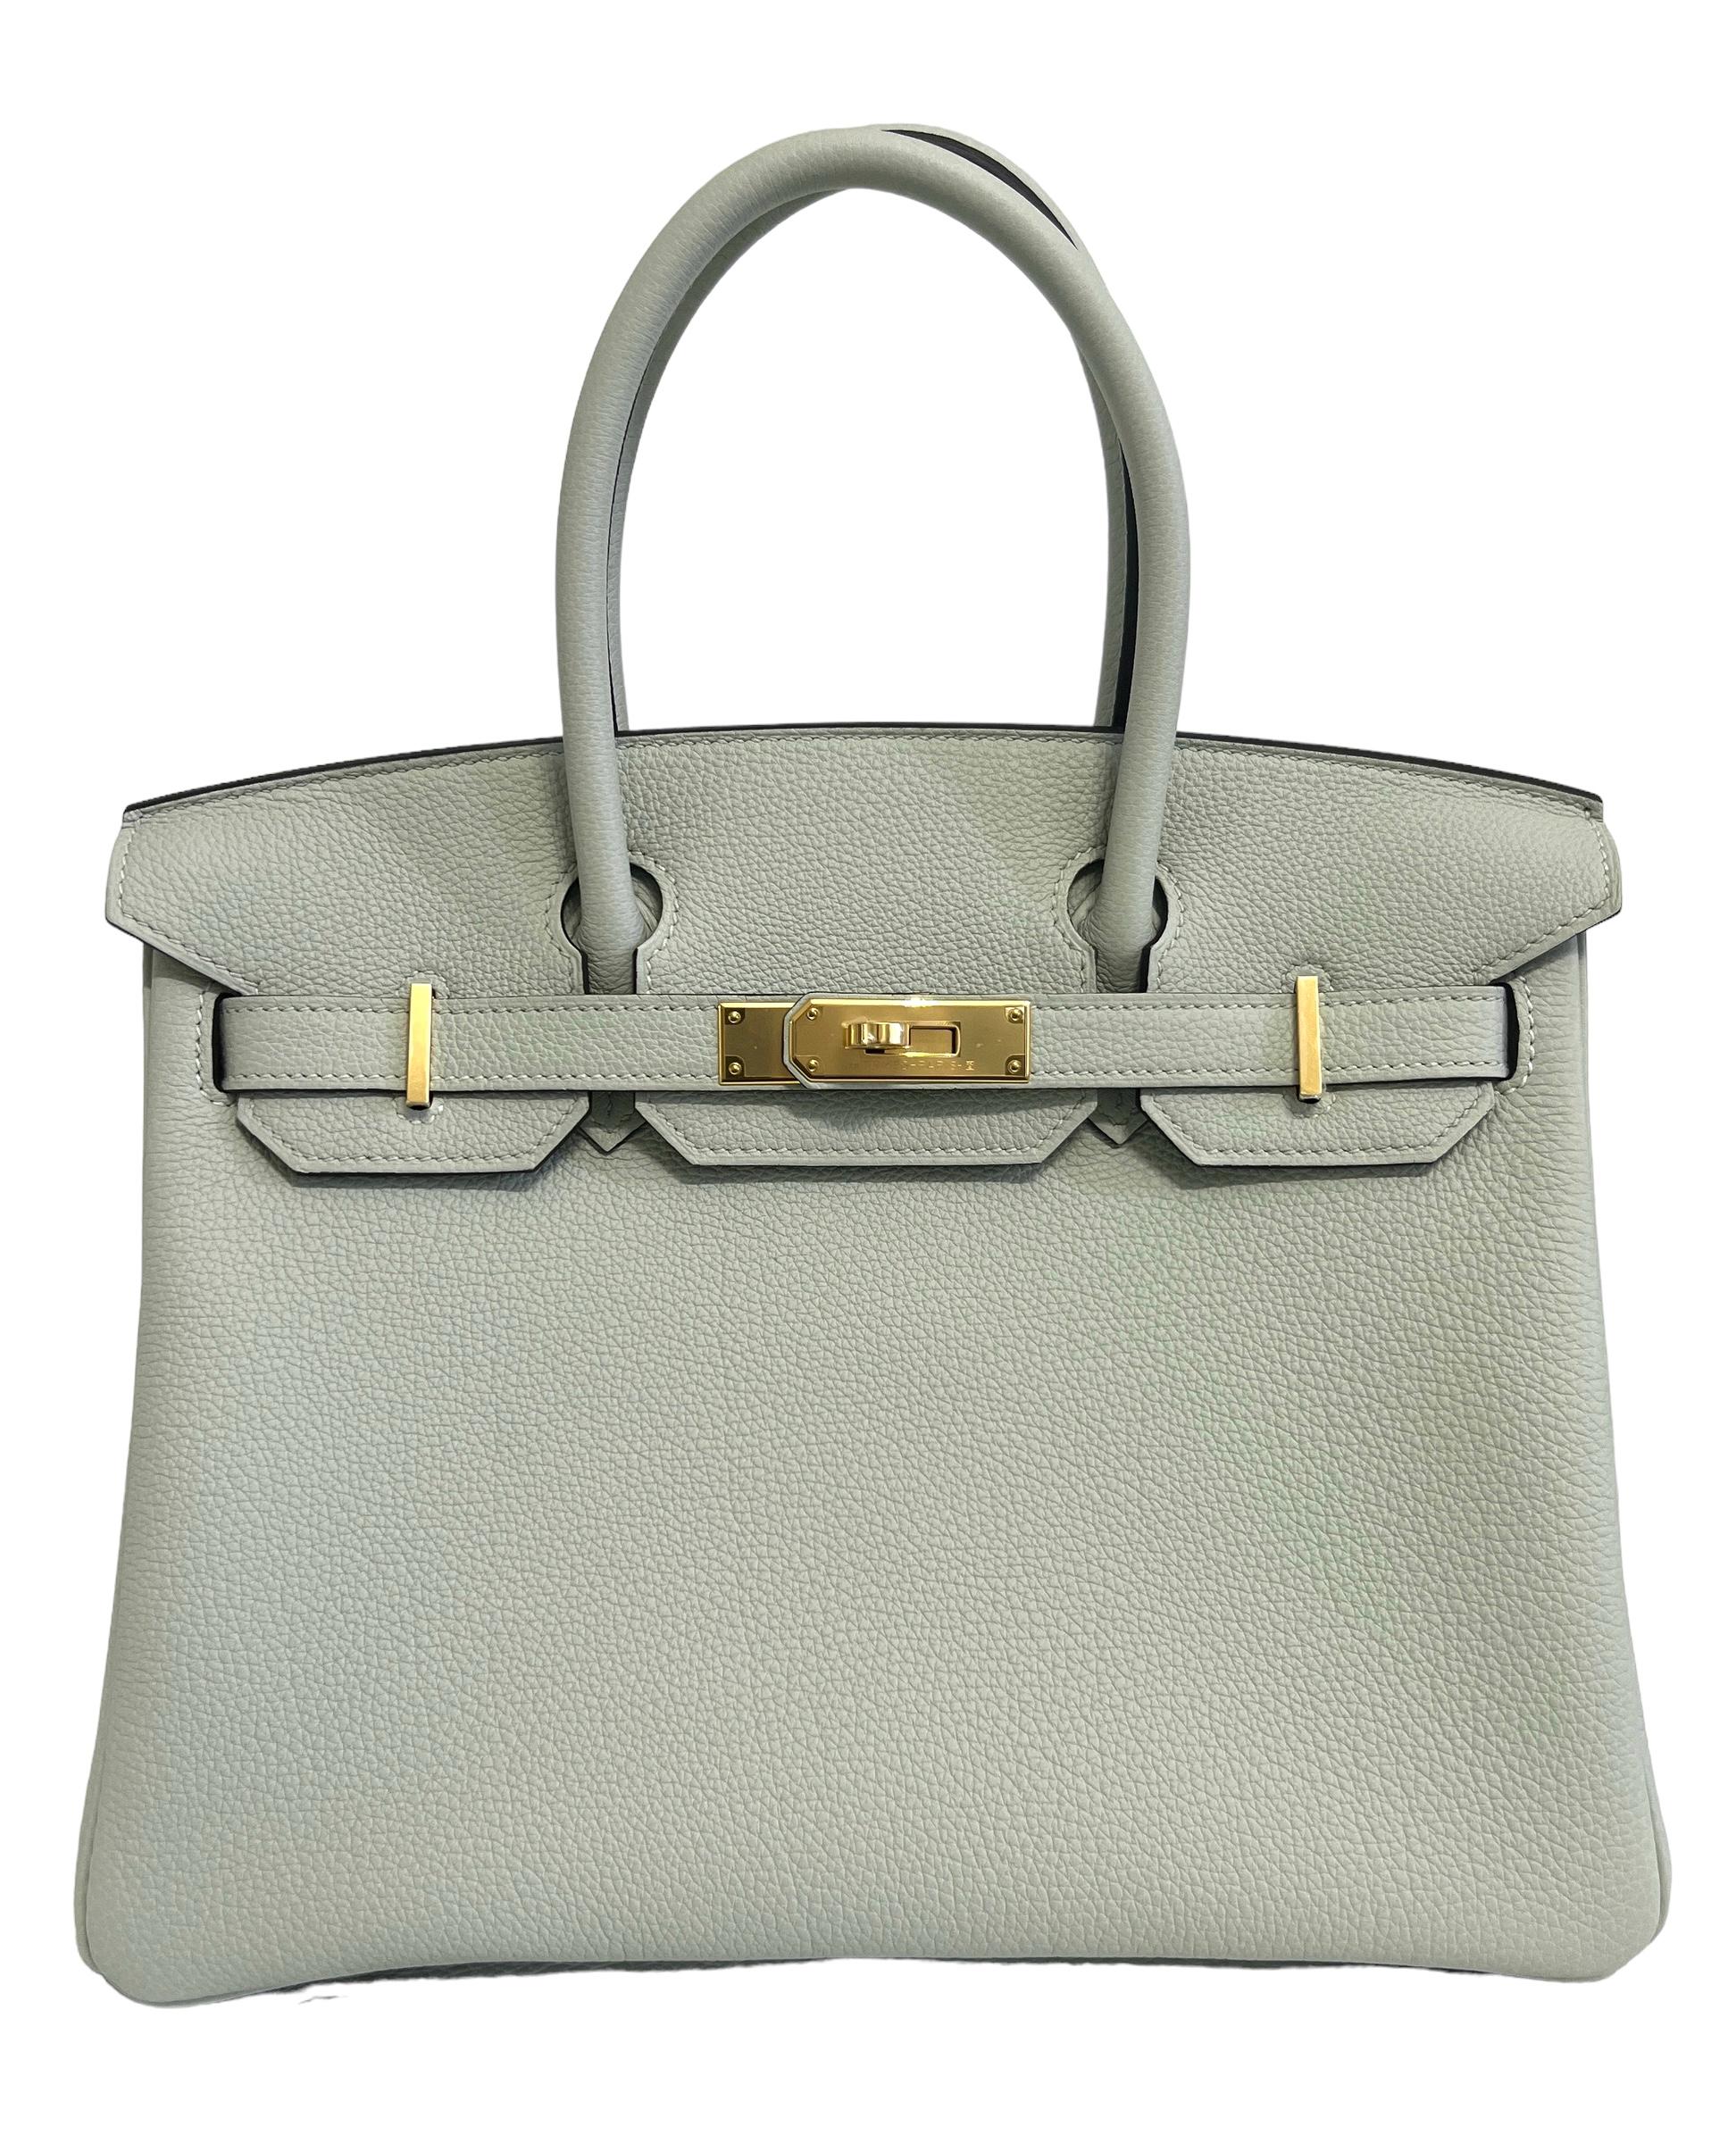 Absolutely Stunning Rare New 2023 Hermes Birkin 30 Gris Neve Togo Leather complimented by Gold Hardware. B Stamp 2023. BRAND NEW COLOR!

Shop with Confidence from Lux Addicts. Authenticity Guaranteed! 

Lux Addicts is a Premier Luxury Dealer and one